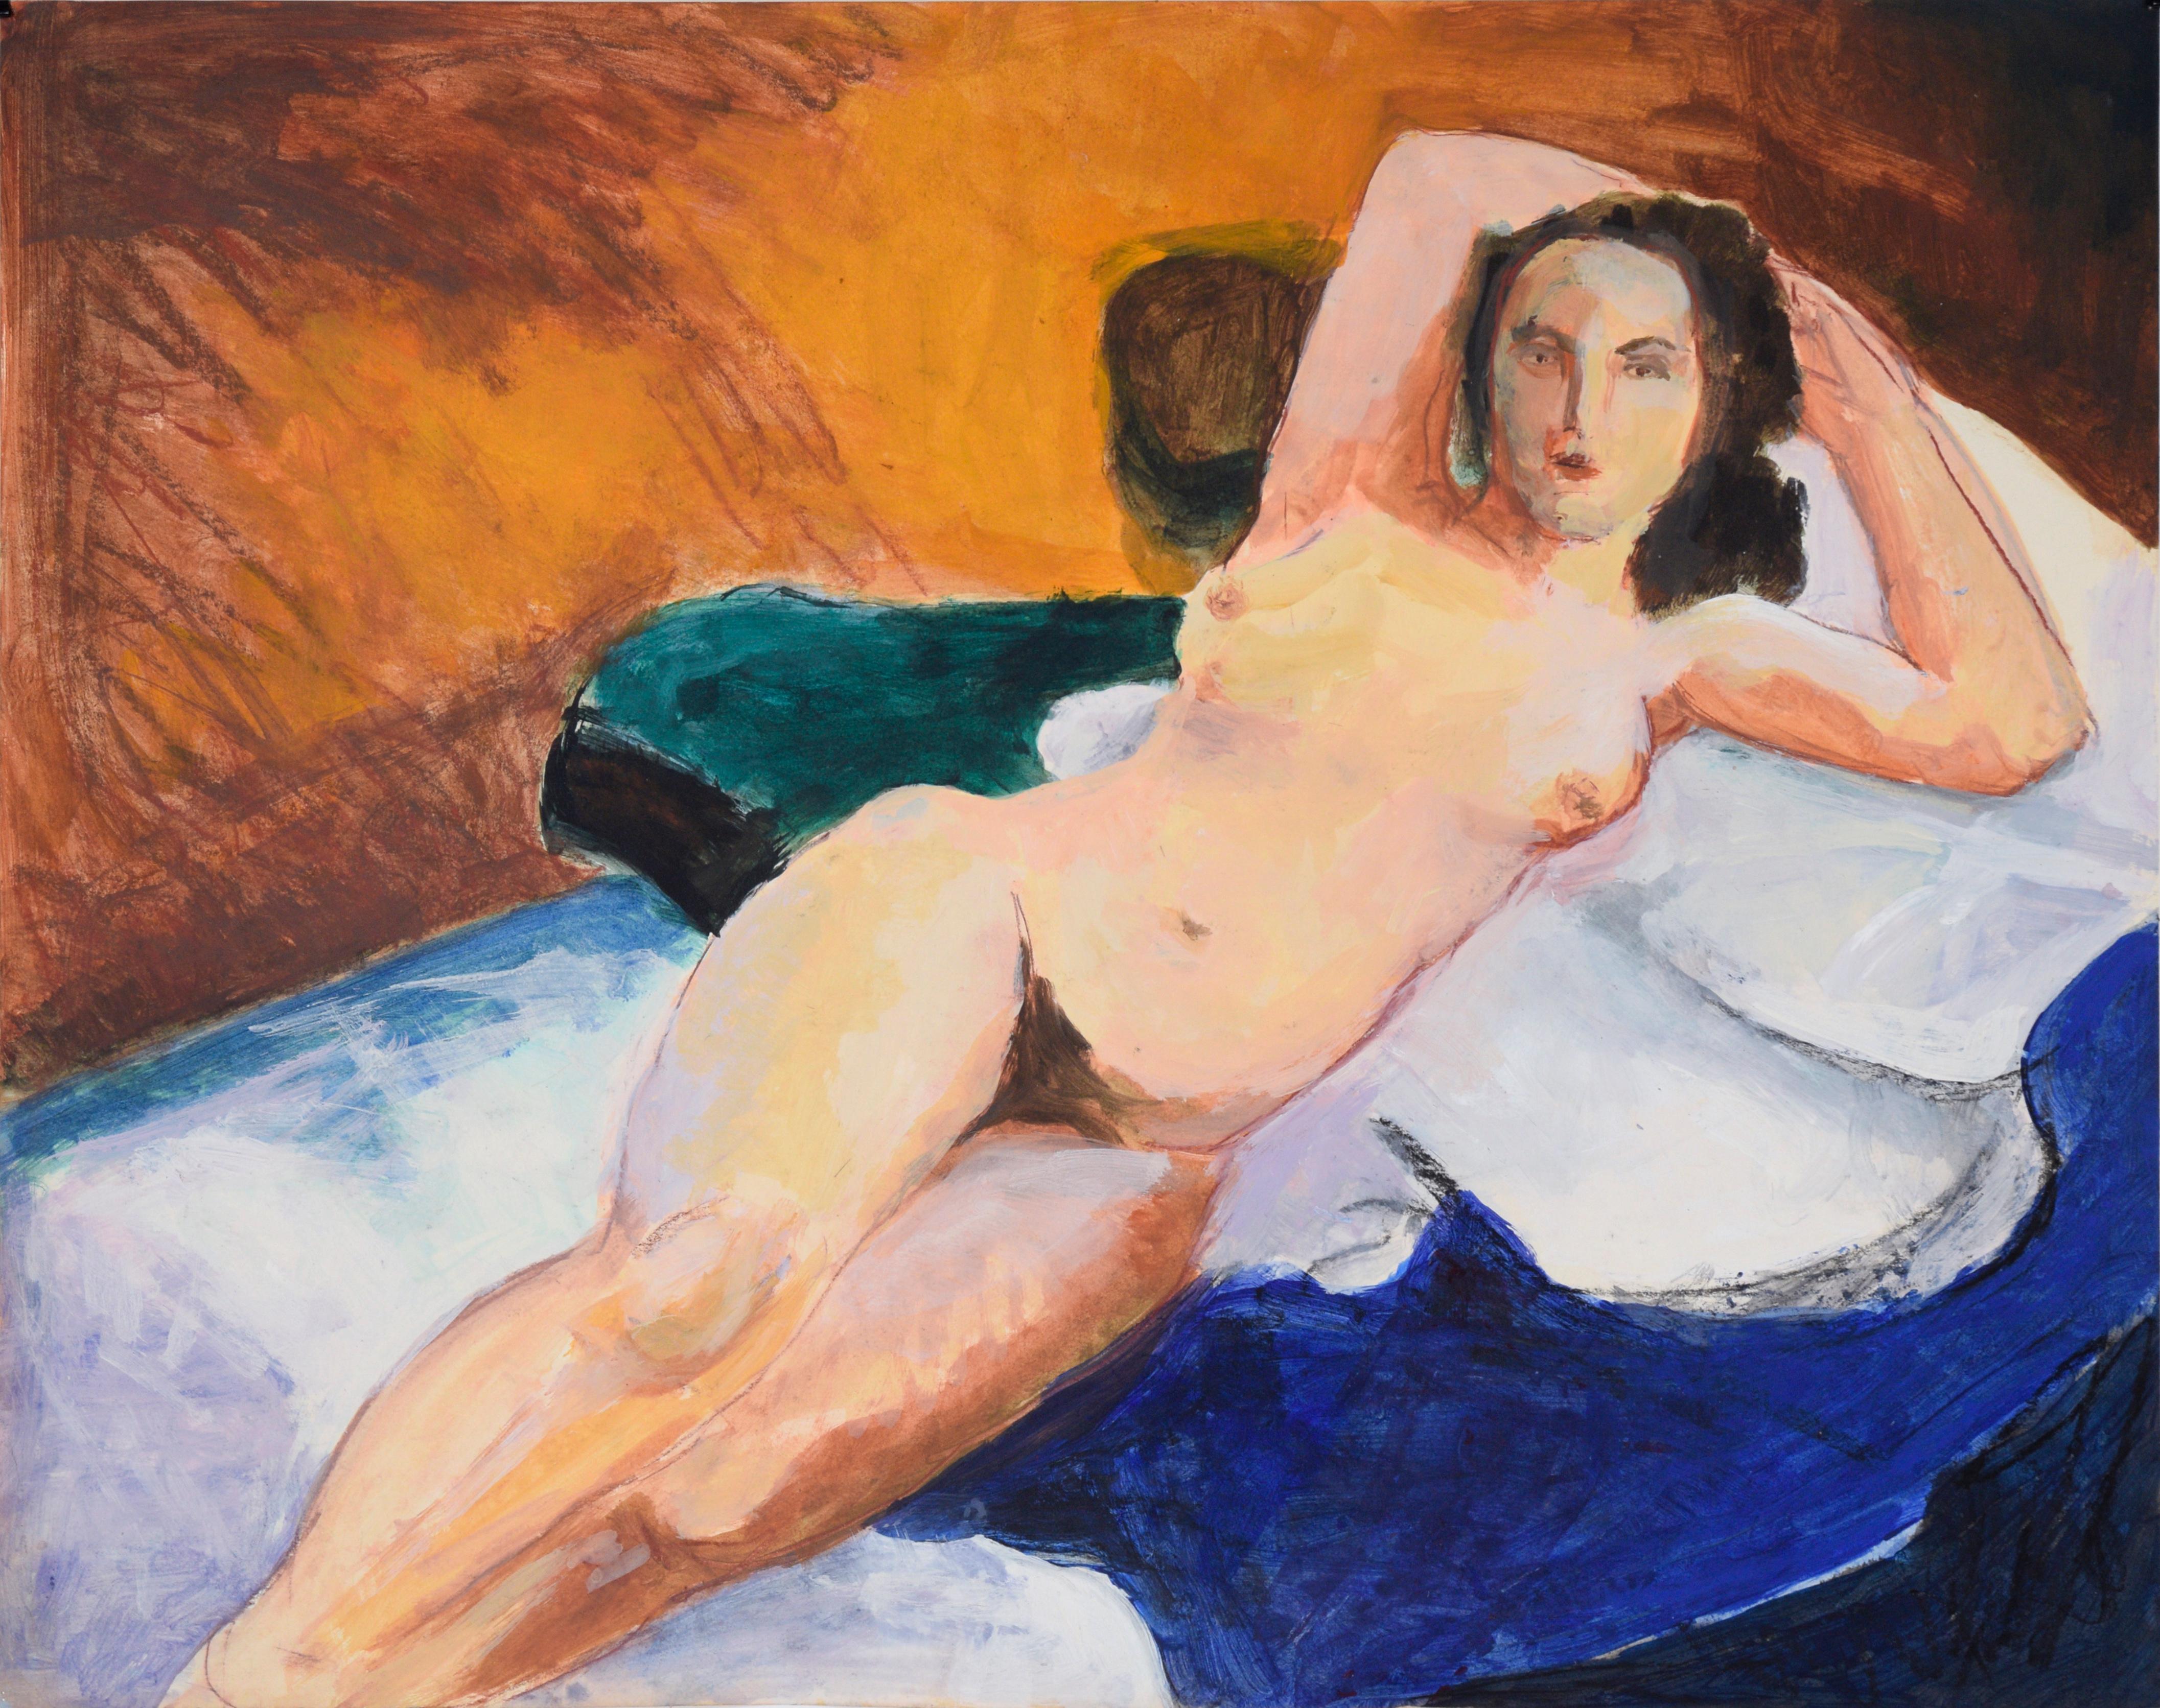 Nude Model on a White and Blue Bed in Acrylic on Paper